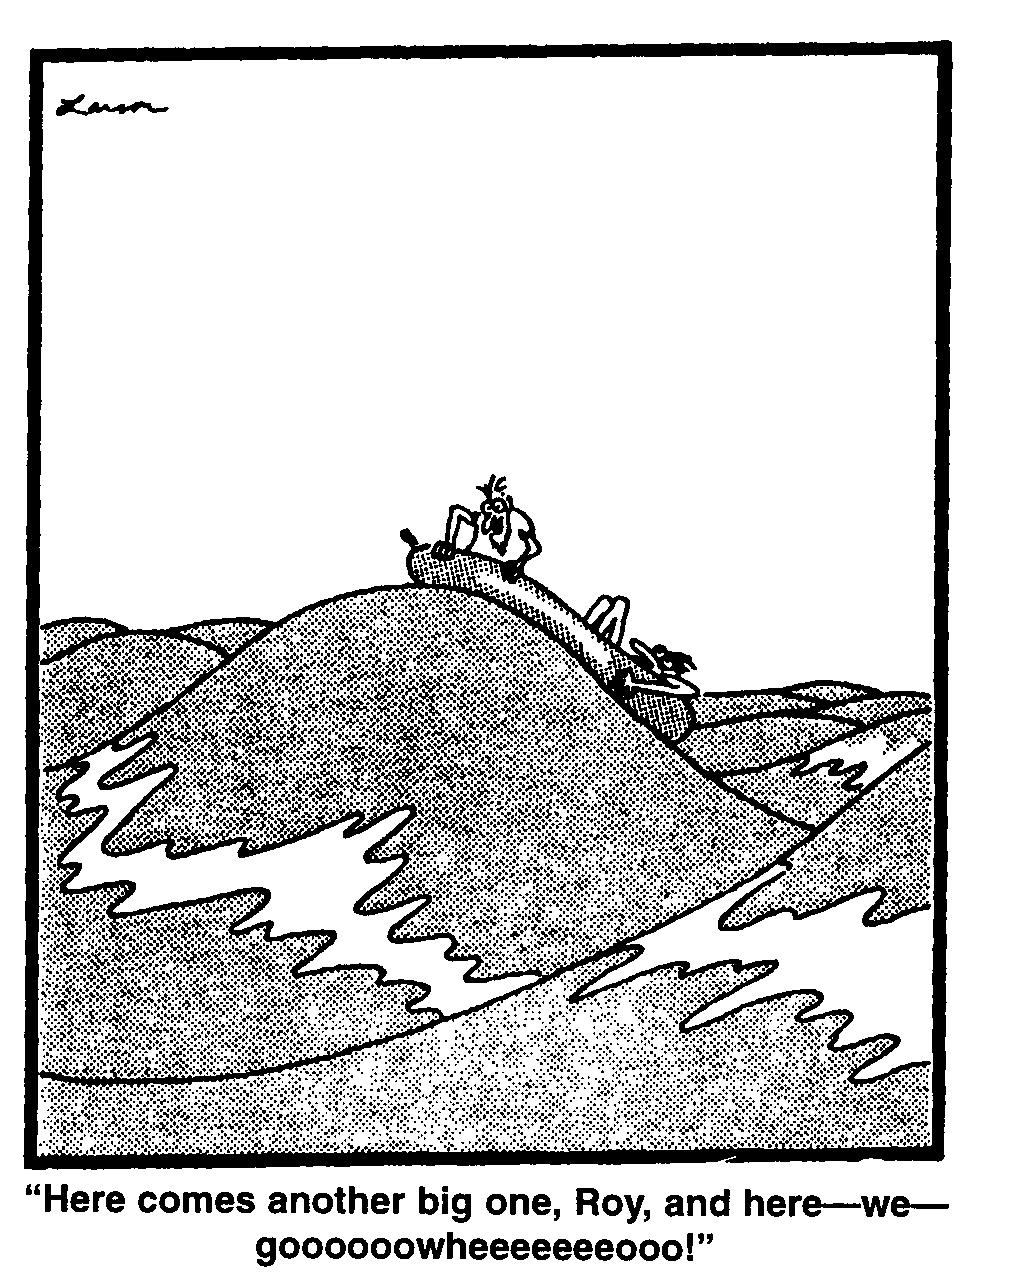 10. The cartoon below presents a humorous look at wave action.